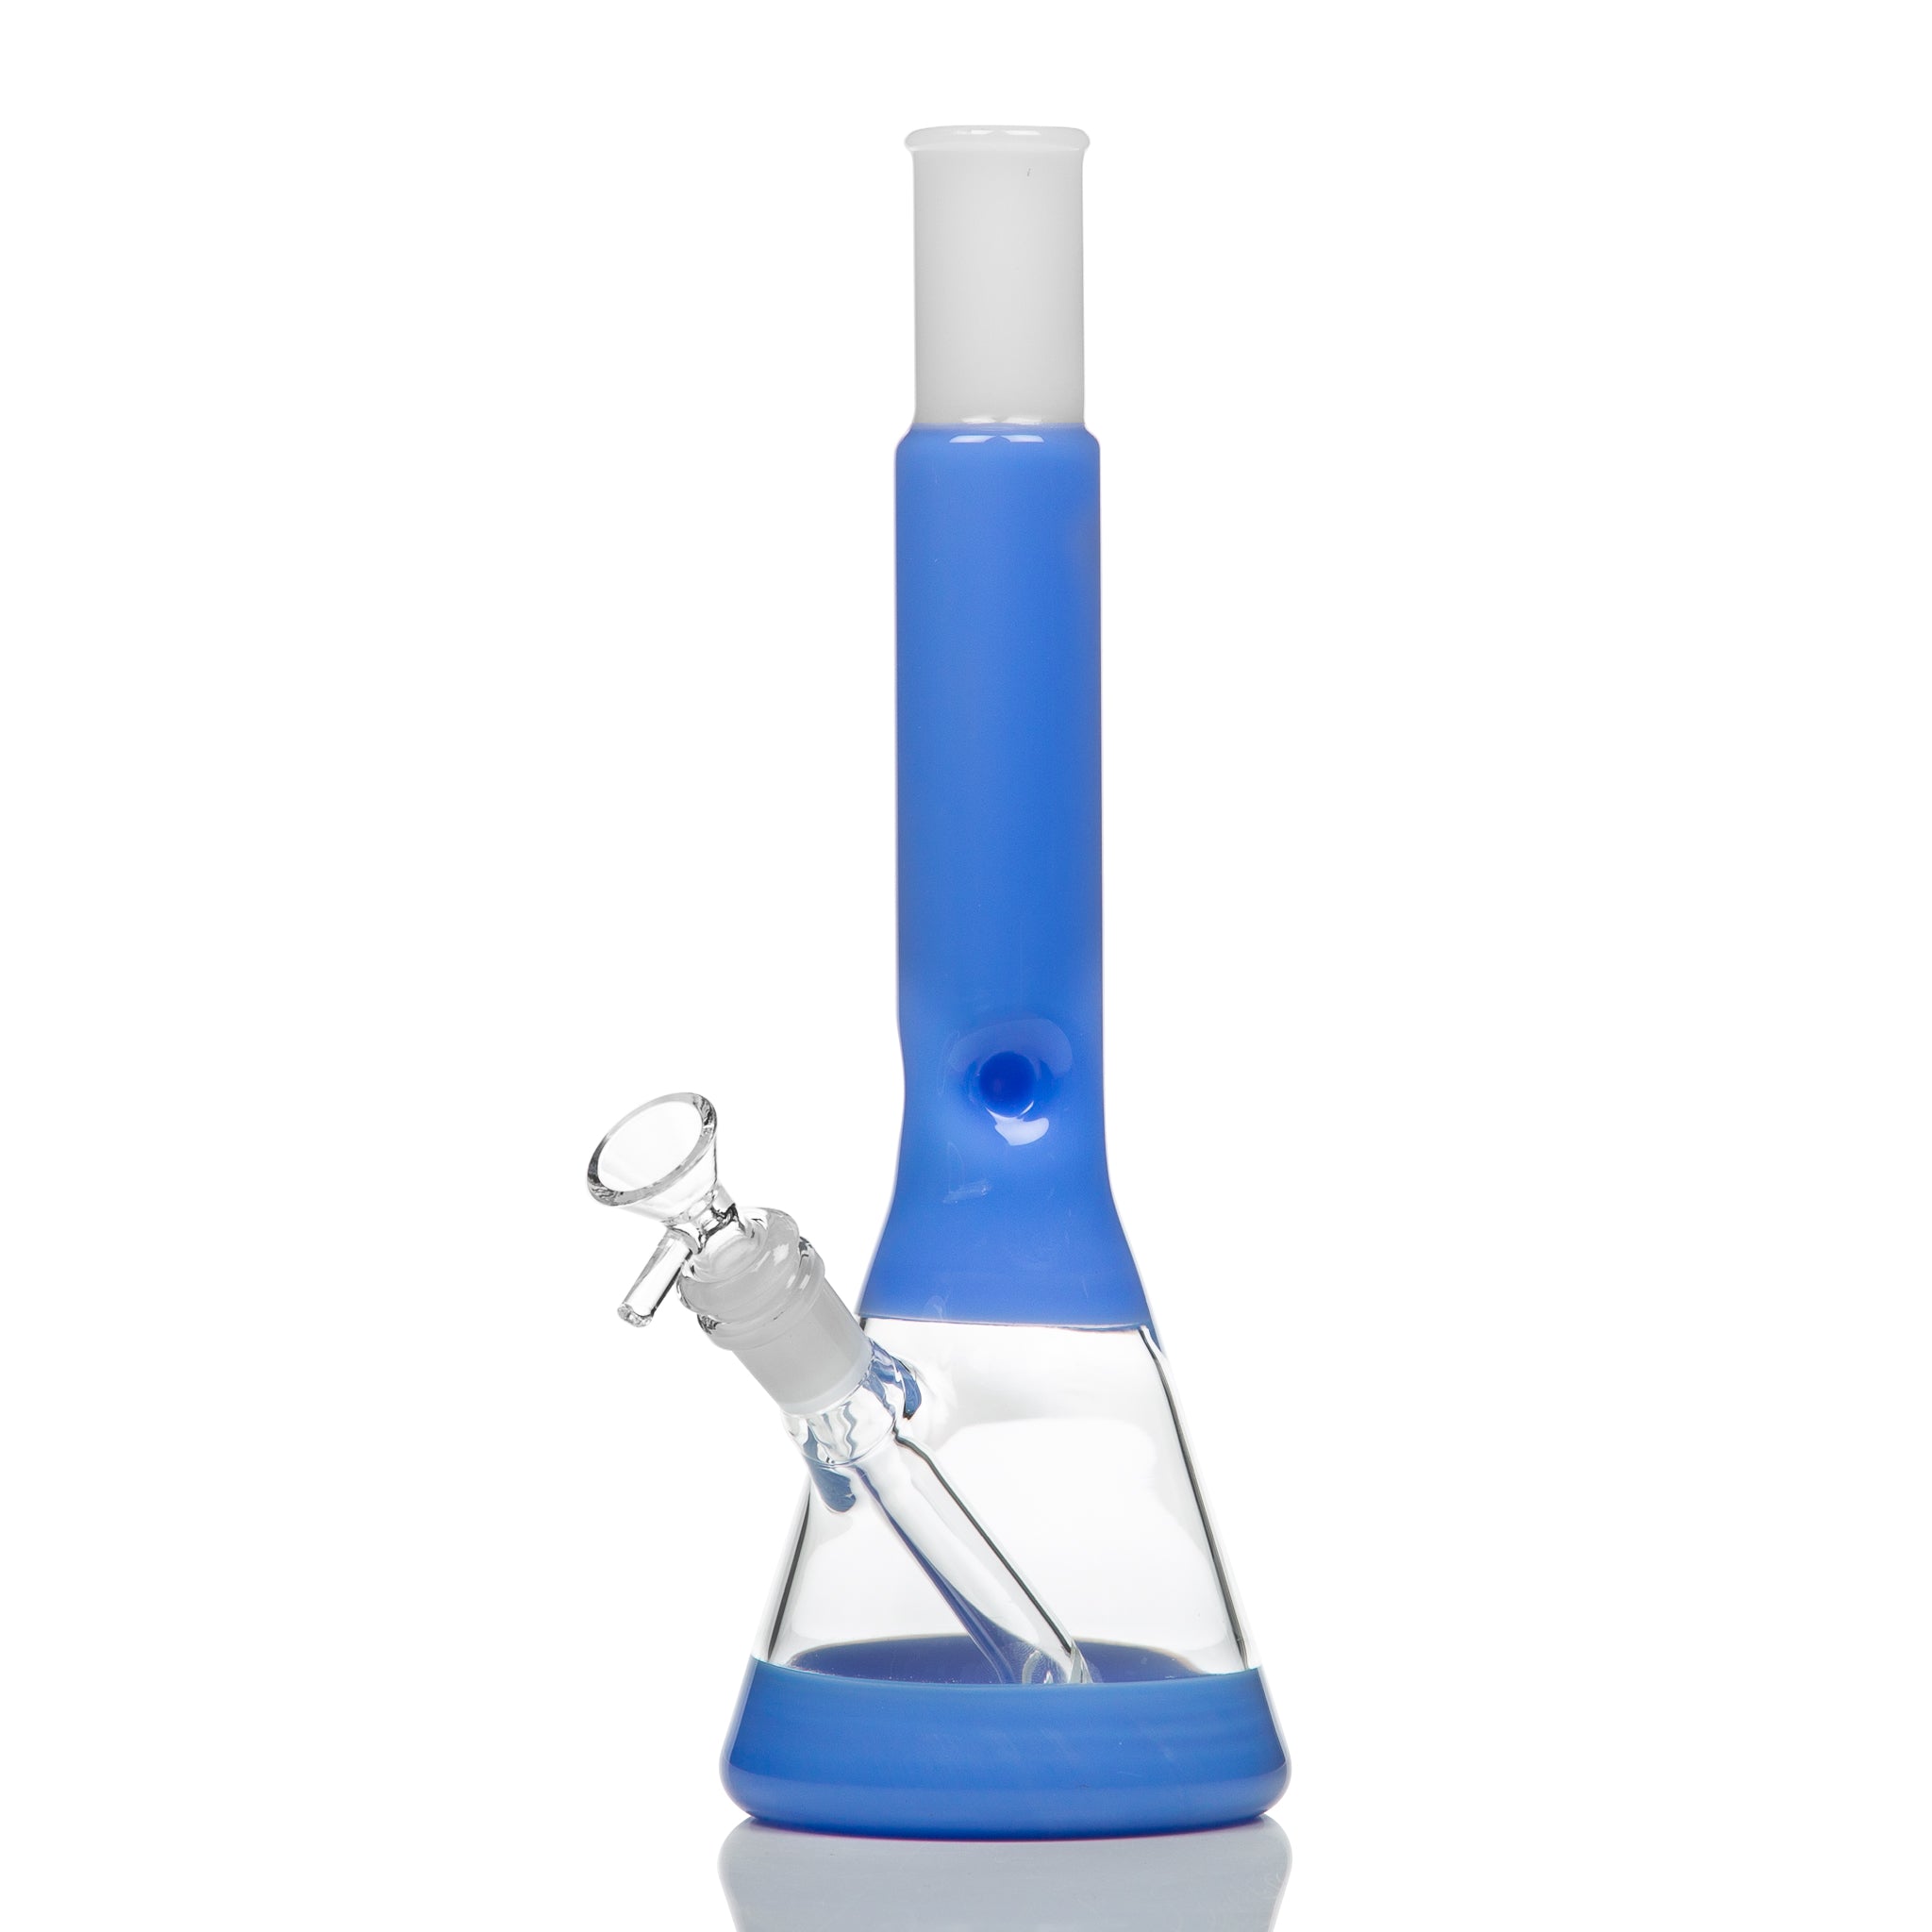 30cm tall beaker bong with down stem and cone piece.